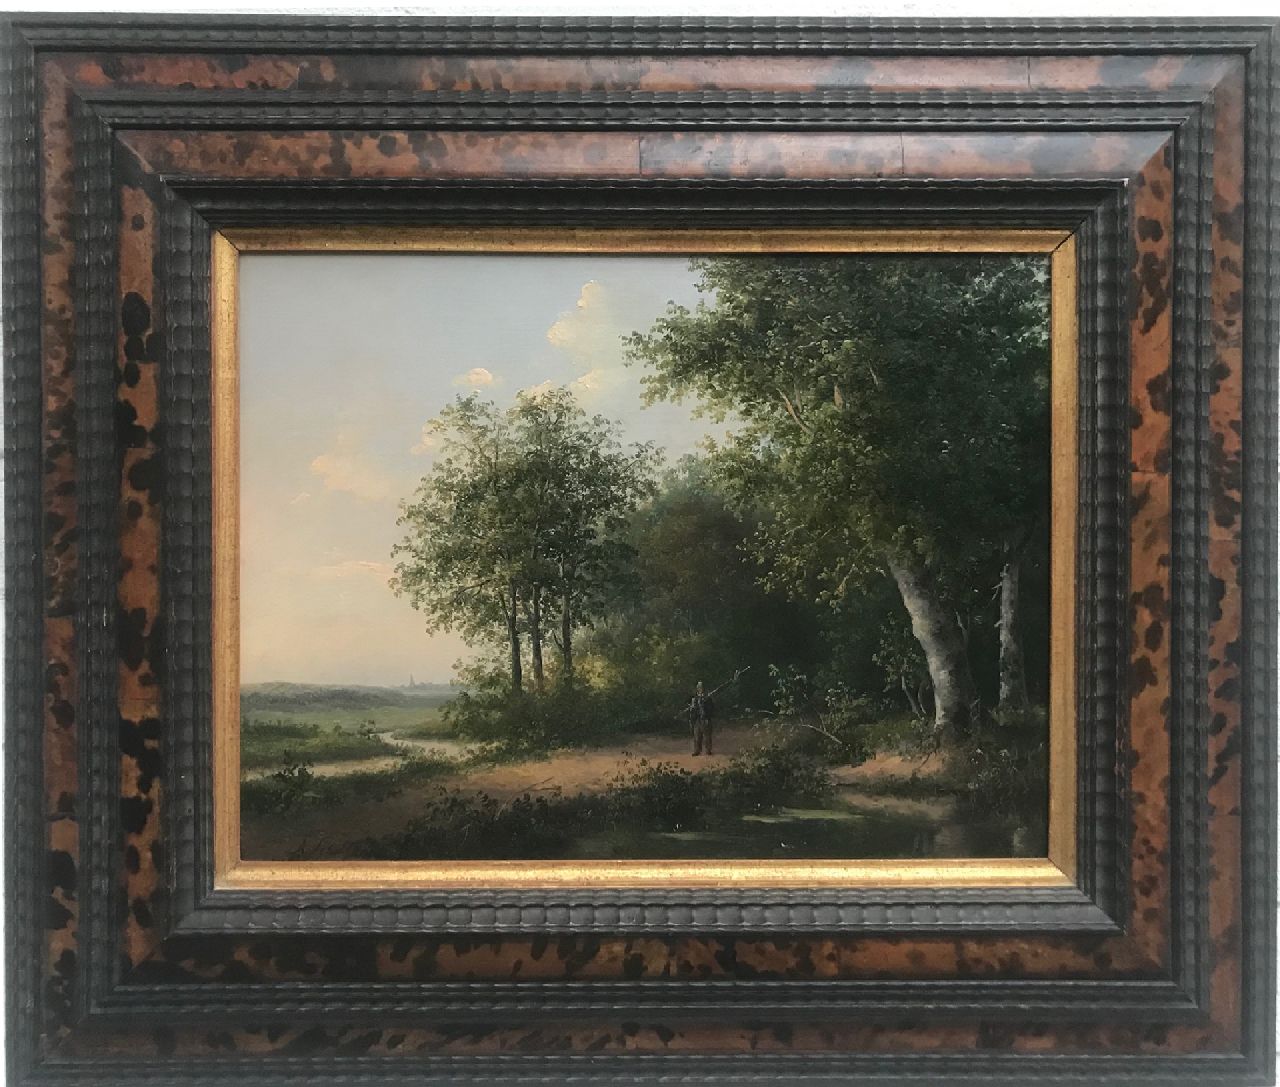 Schelfhout A.  | Andreas Schelfhout | Paintings offered for sale | Fisherman in a forest, oil on panel 26.0 x 34.5 cm, signed l.l. and painted ca. 1822